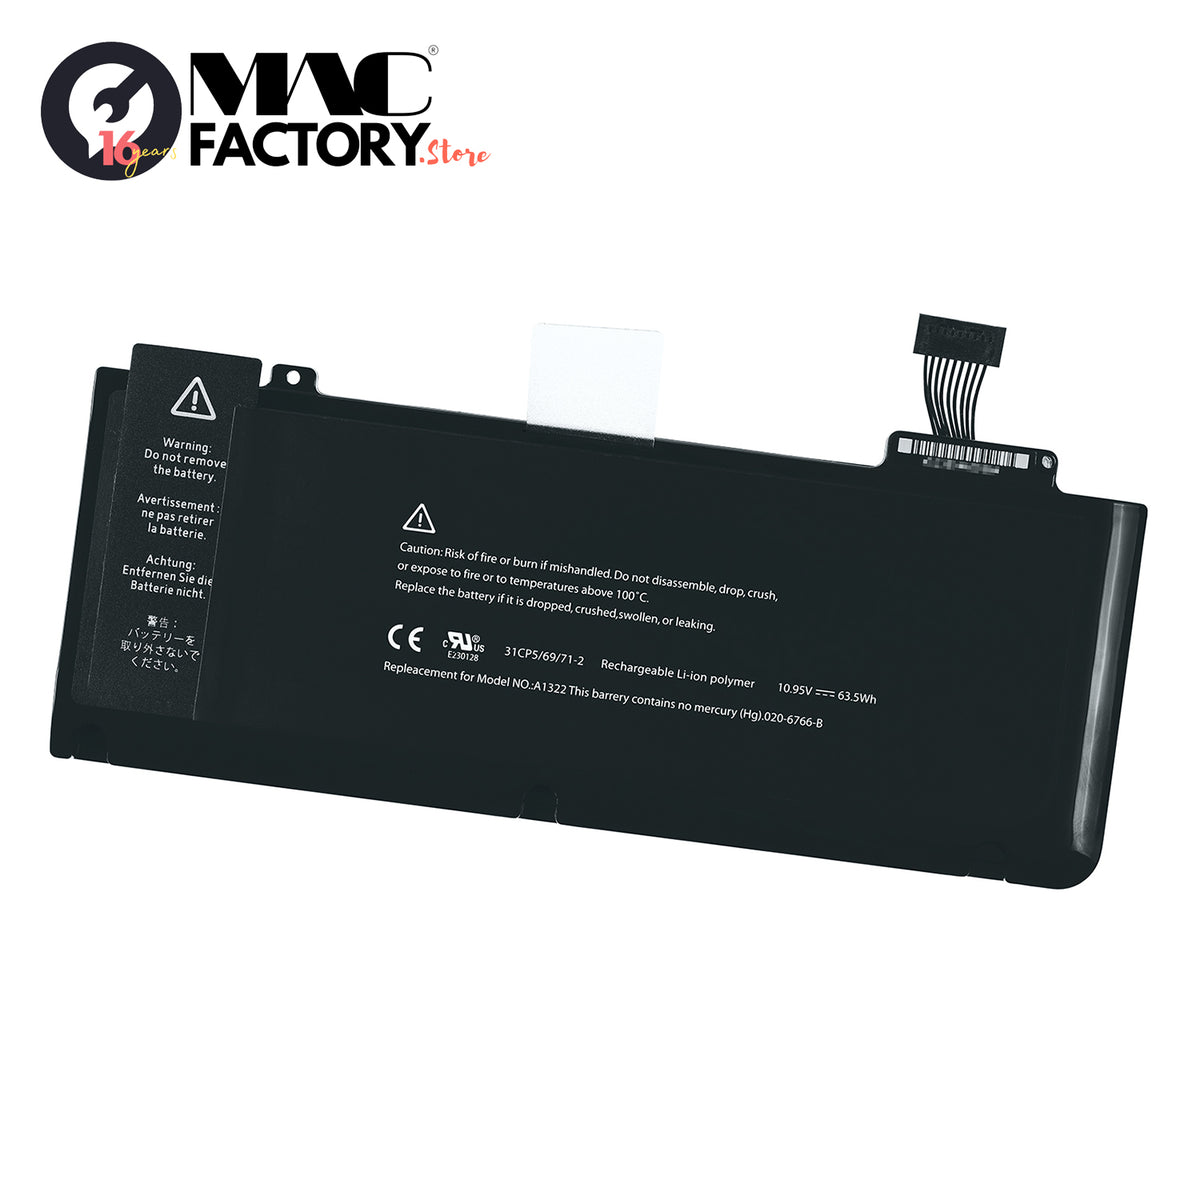 Avance A1322 10.95V-6000MAH 63.5WH Battery for Apple MacBook Pro Unibody 13" A1278 MID 2009 To MID 2012